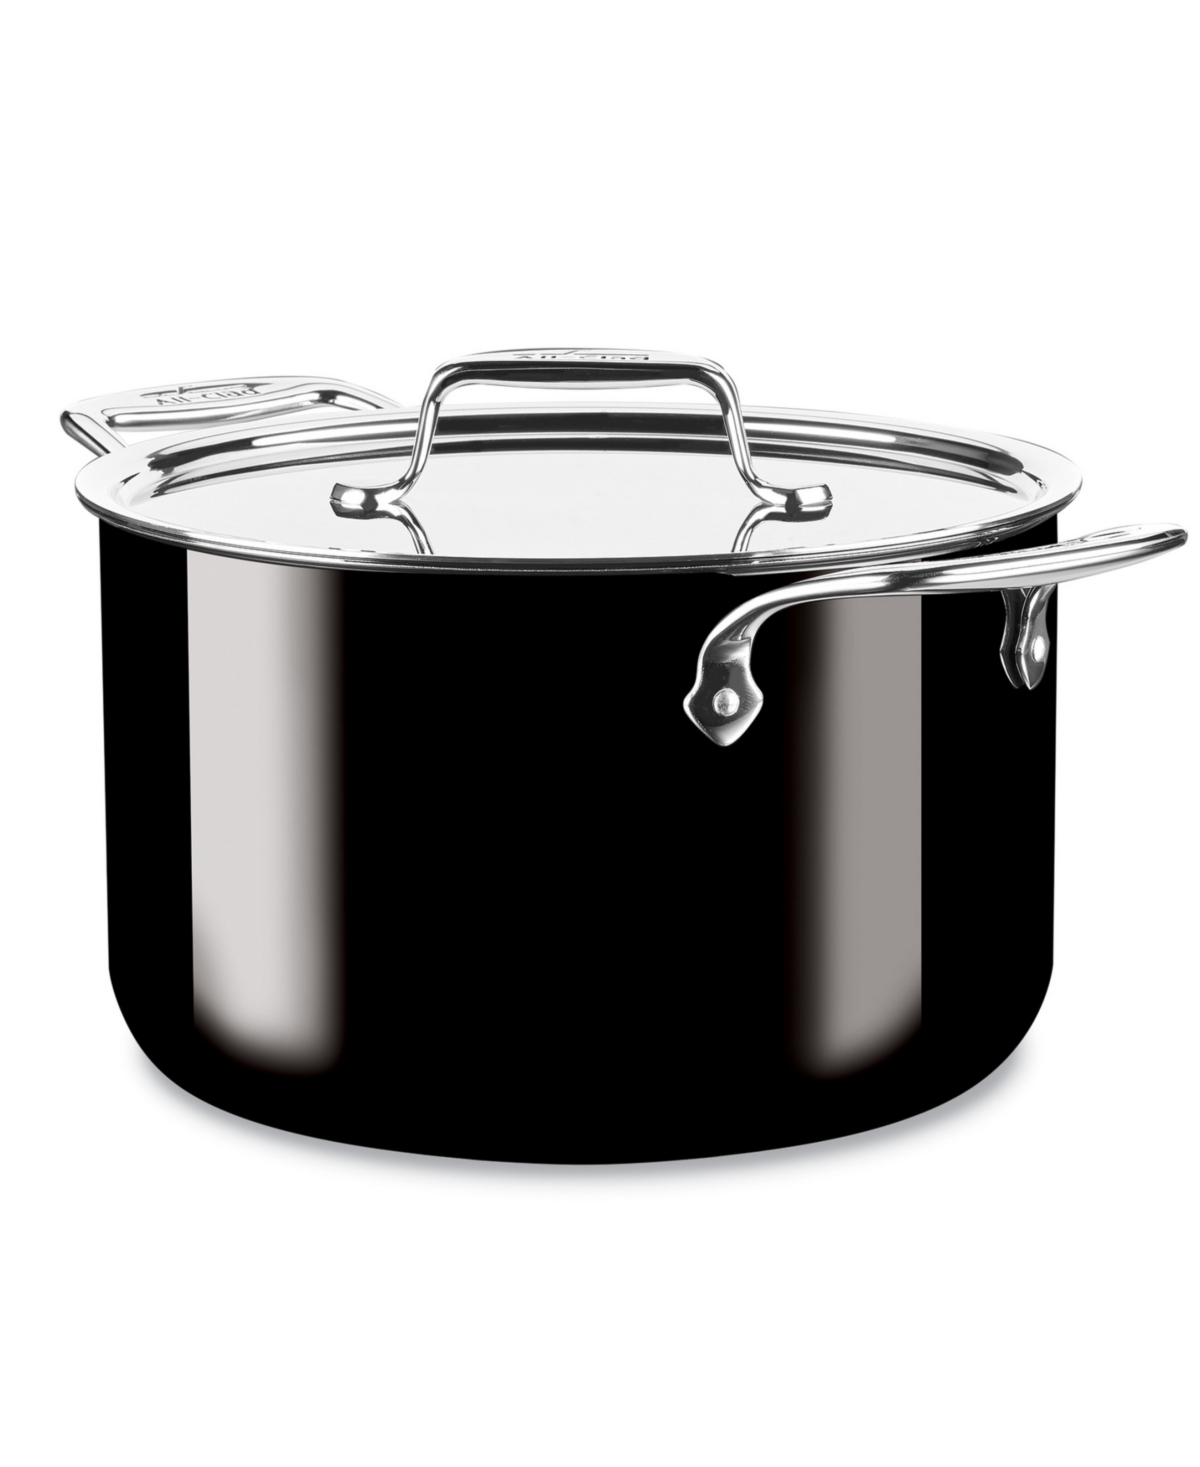 All-clad Fusiontec Natural Ceramic With Steel Core 7-quart Stockpot With Lid In Black